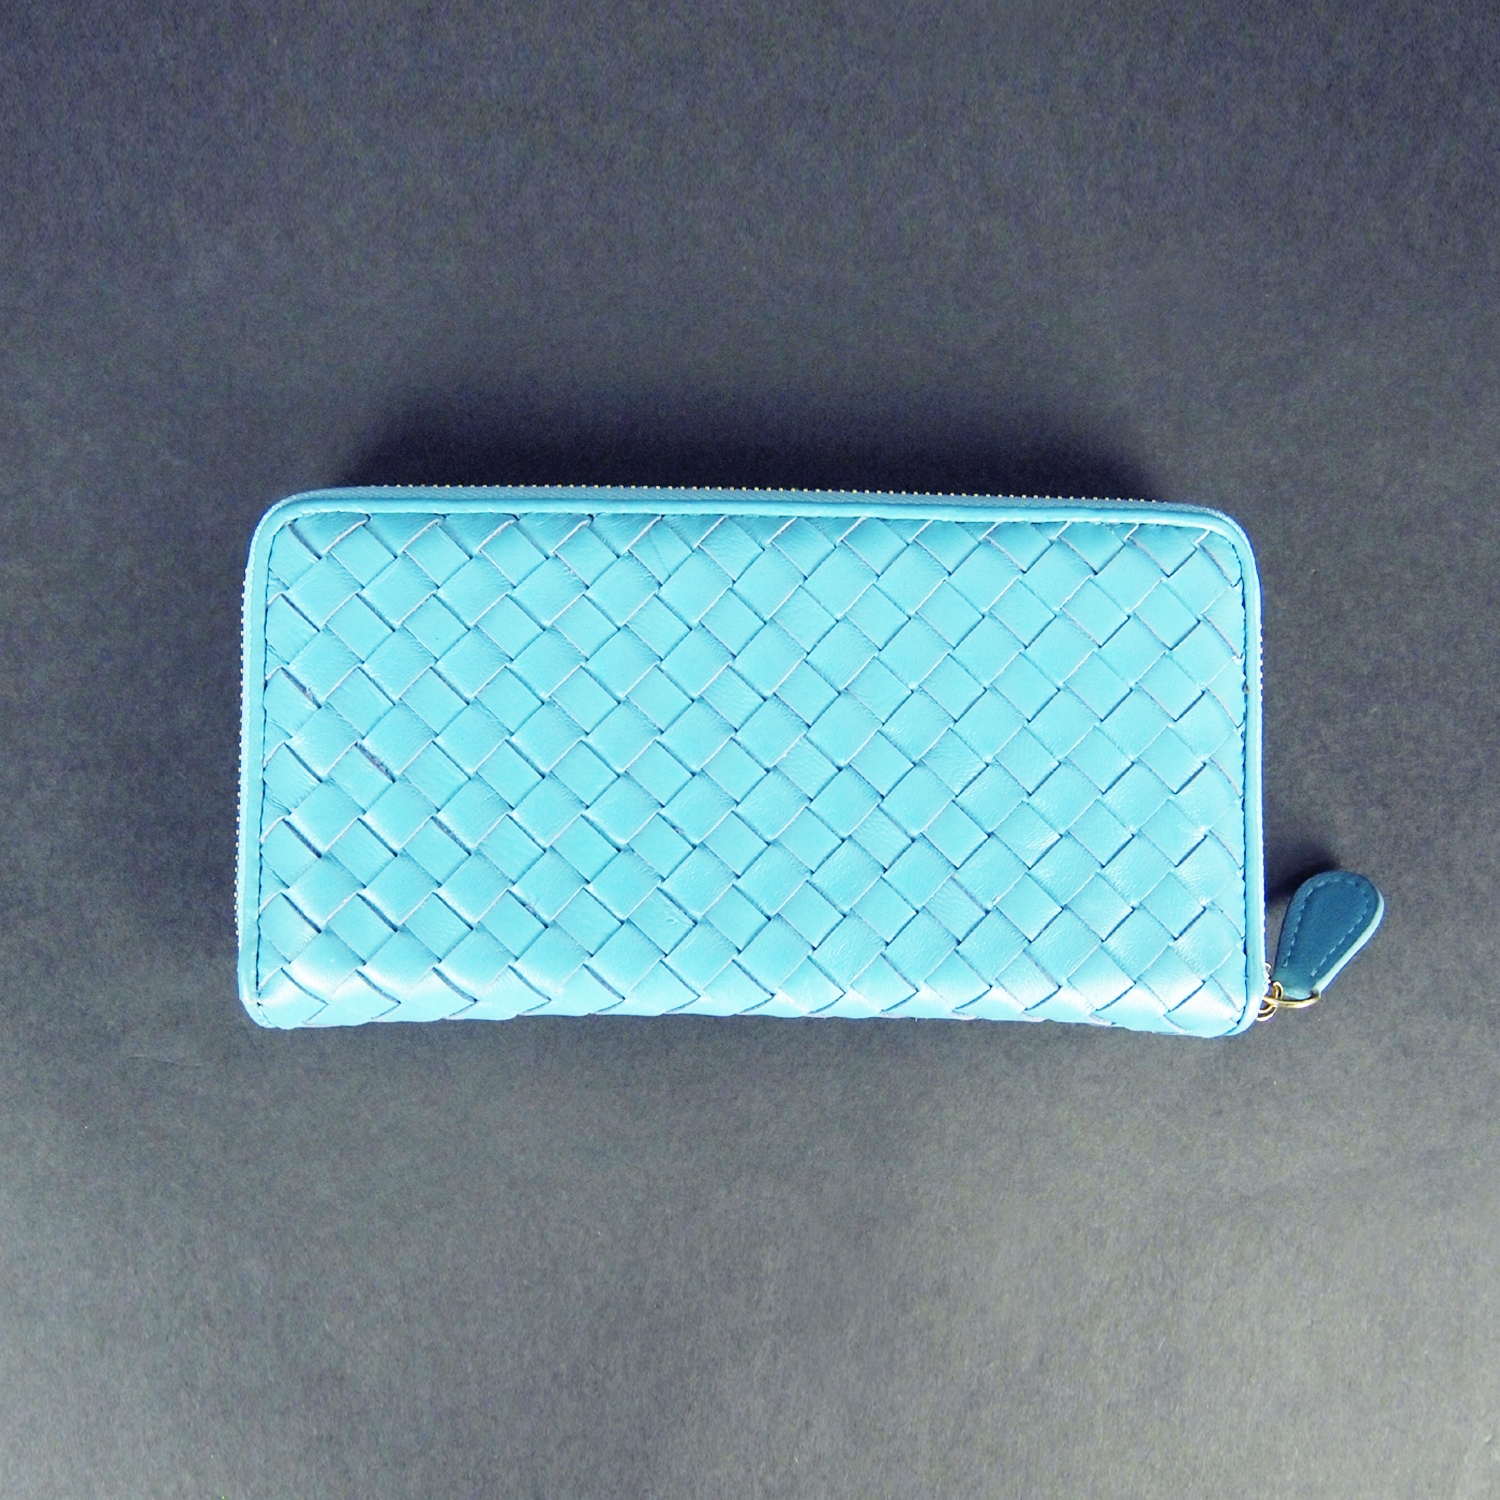 Modern Heritage Natty Woven Lamb Leather Wallet Rear View